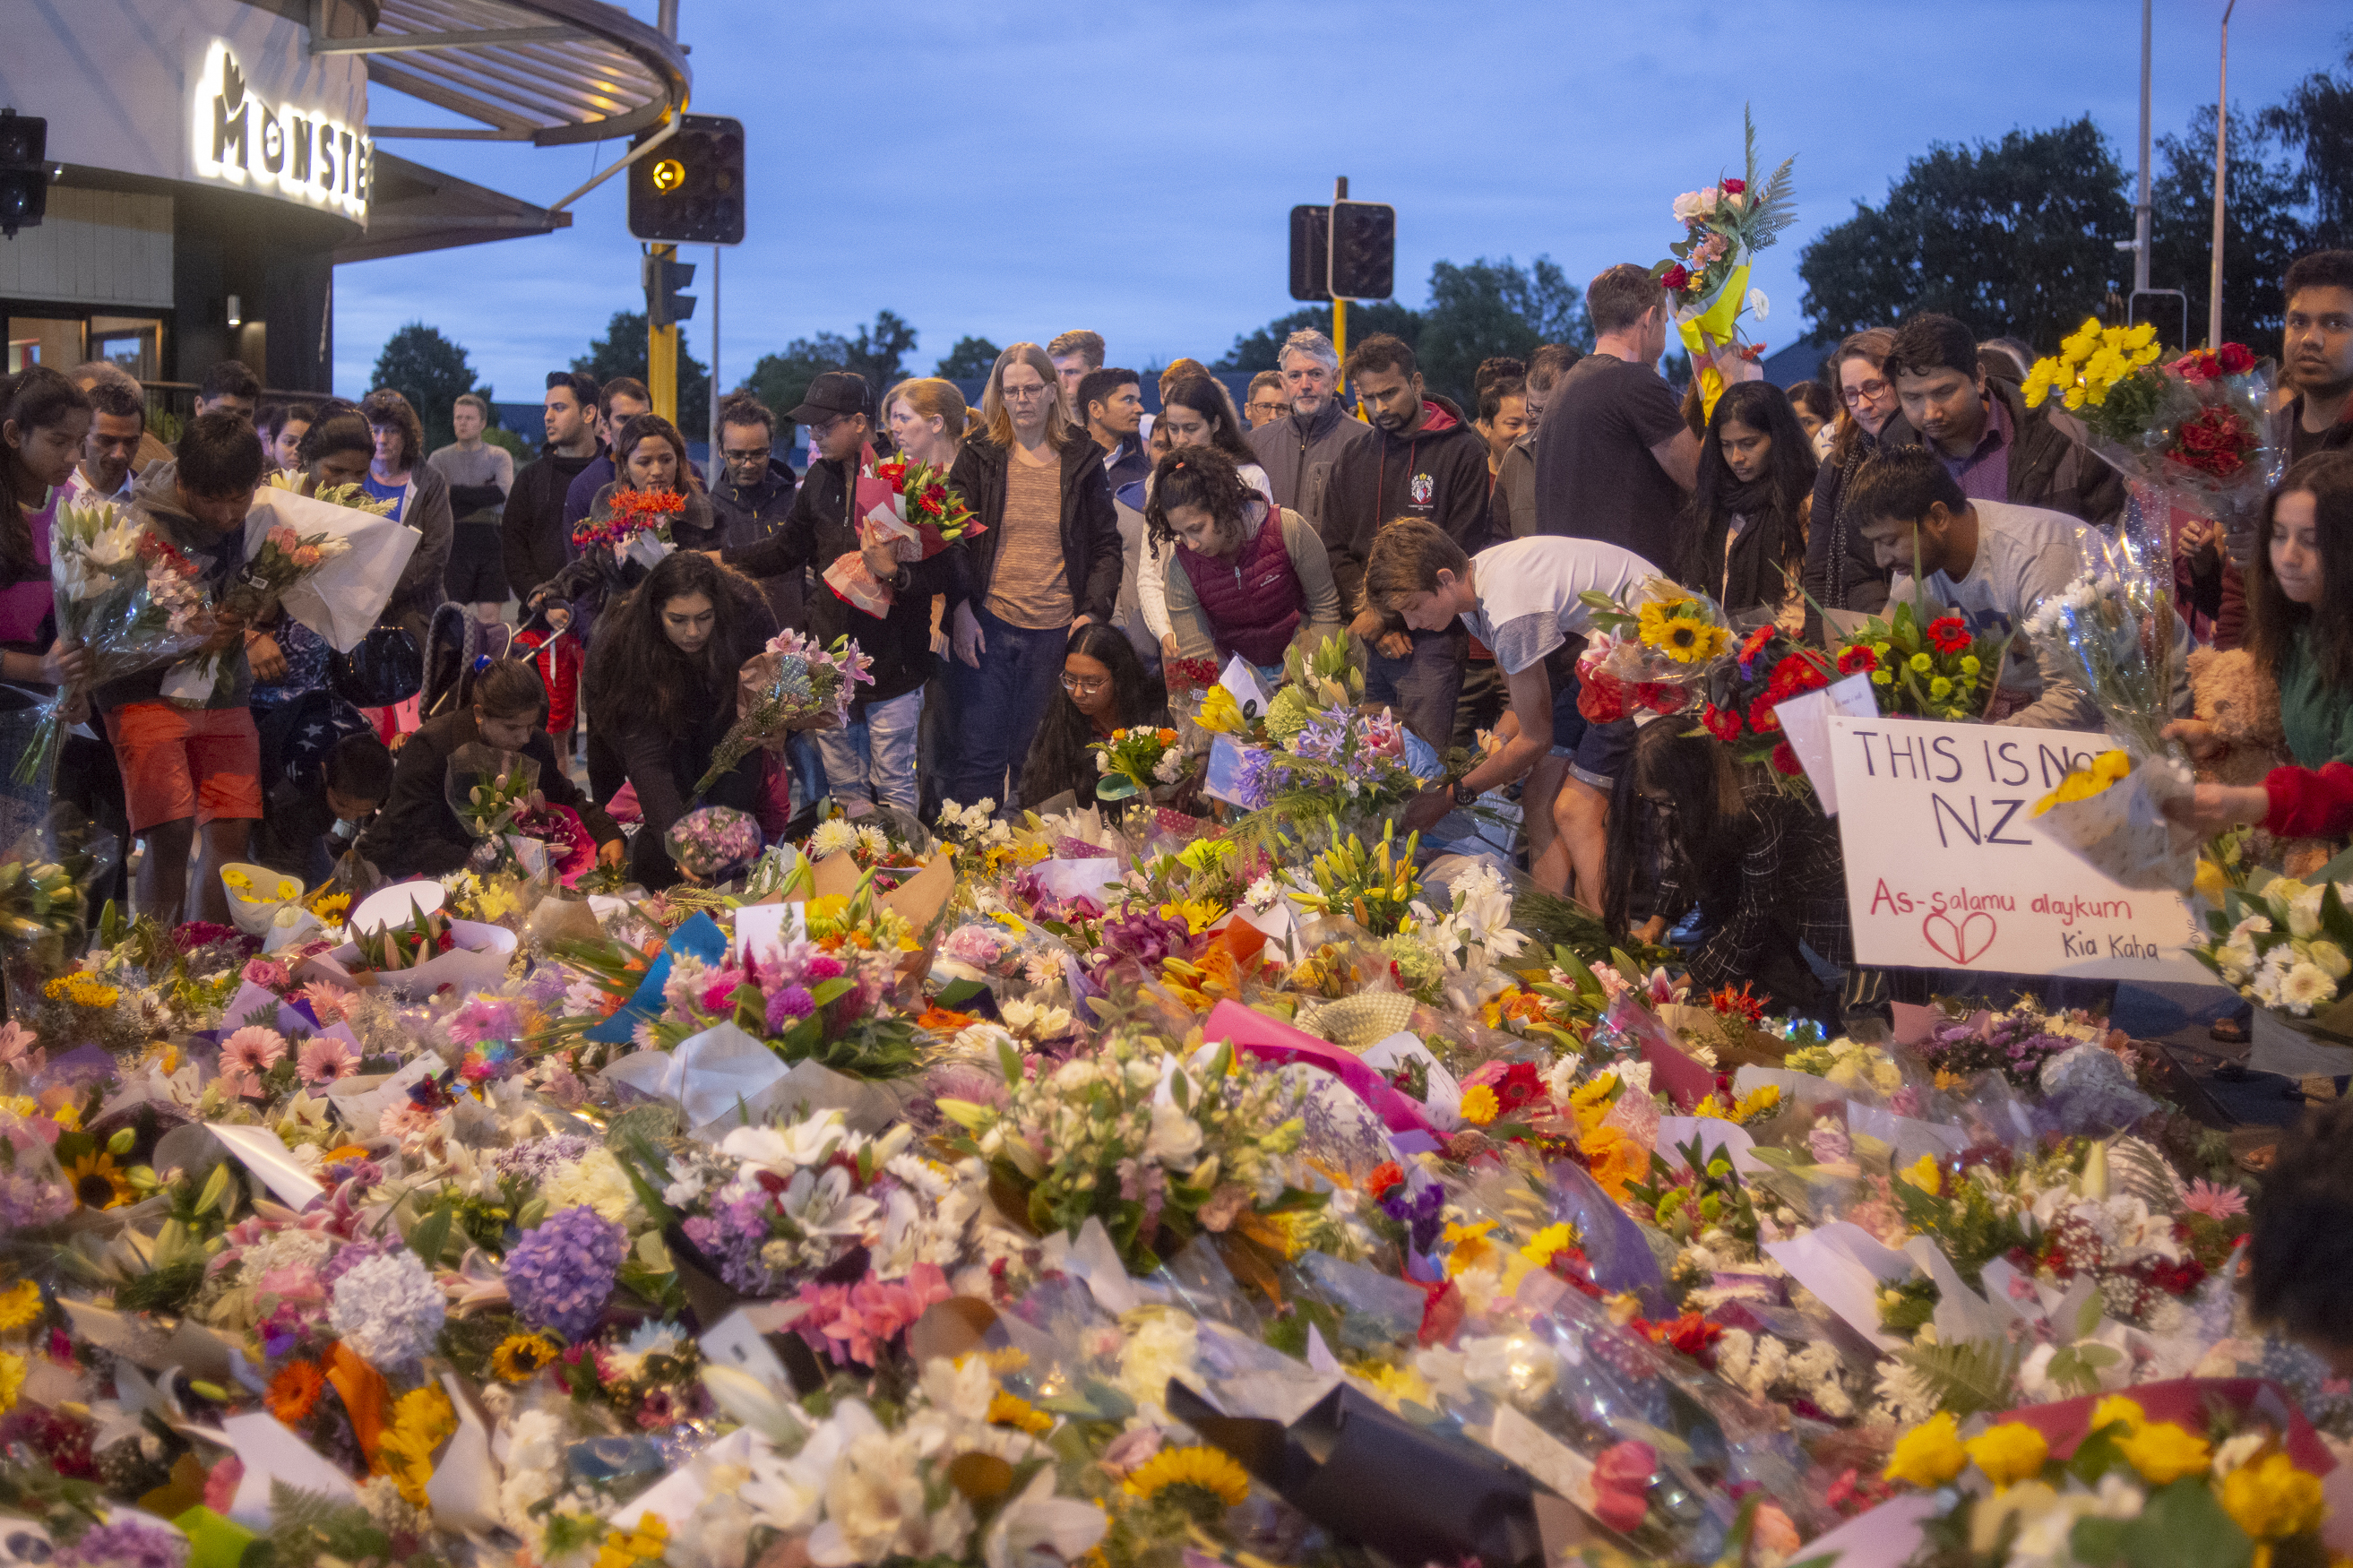 People pay their respects for victims of the March 15 mosque attacks, in Christchurch on March 16, 2019. (Virginia Woods-Jack for TIME)